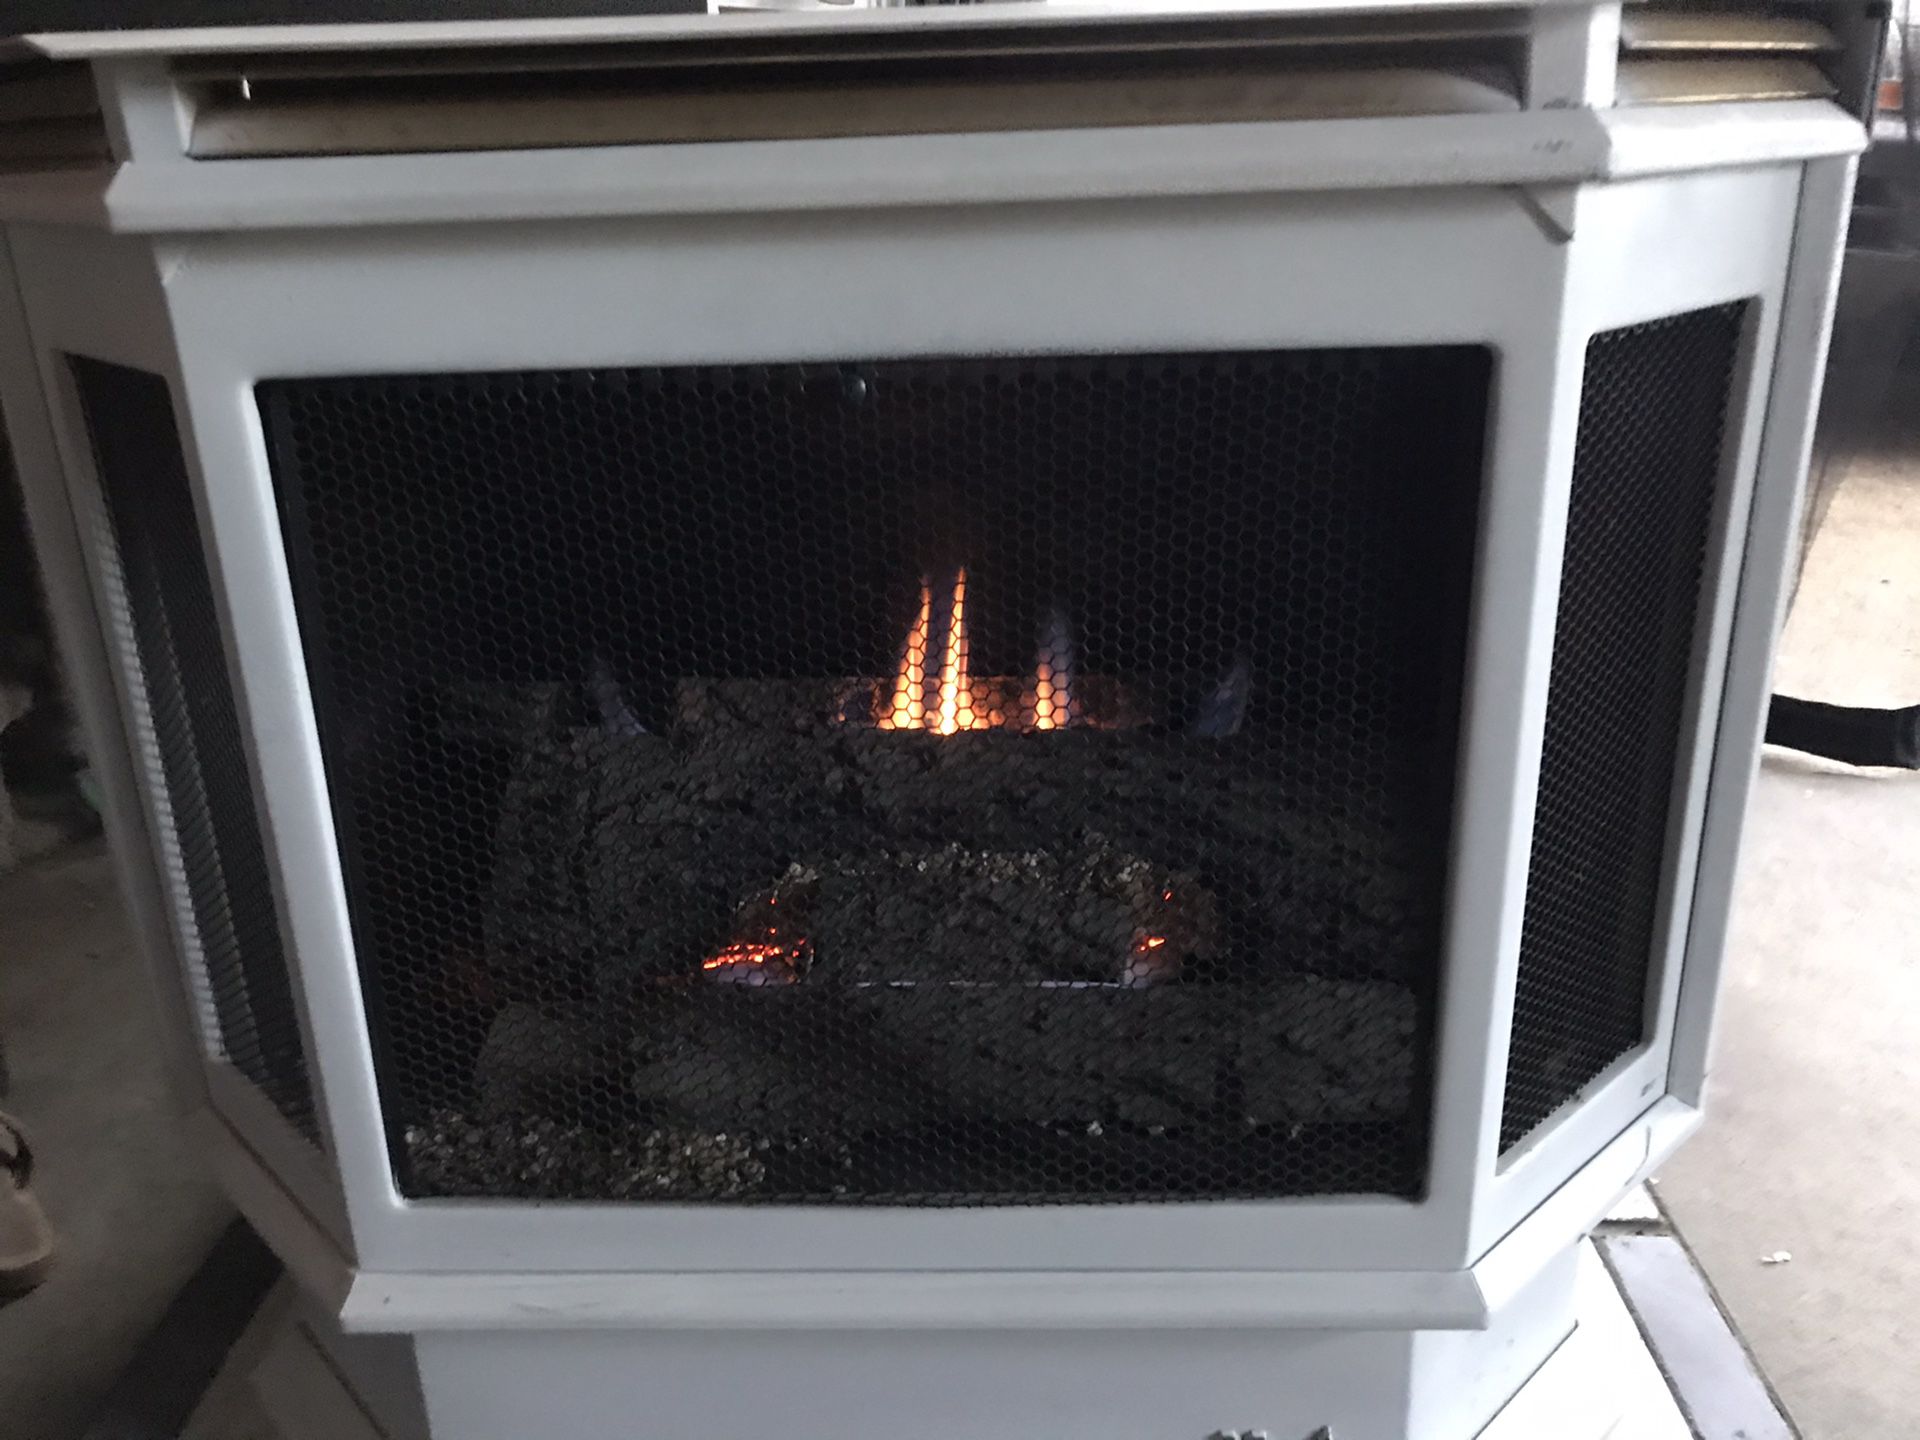 Martin LP has fireplace with fan